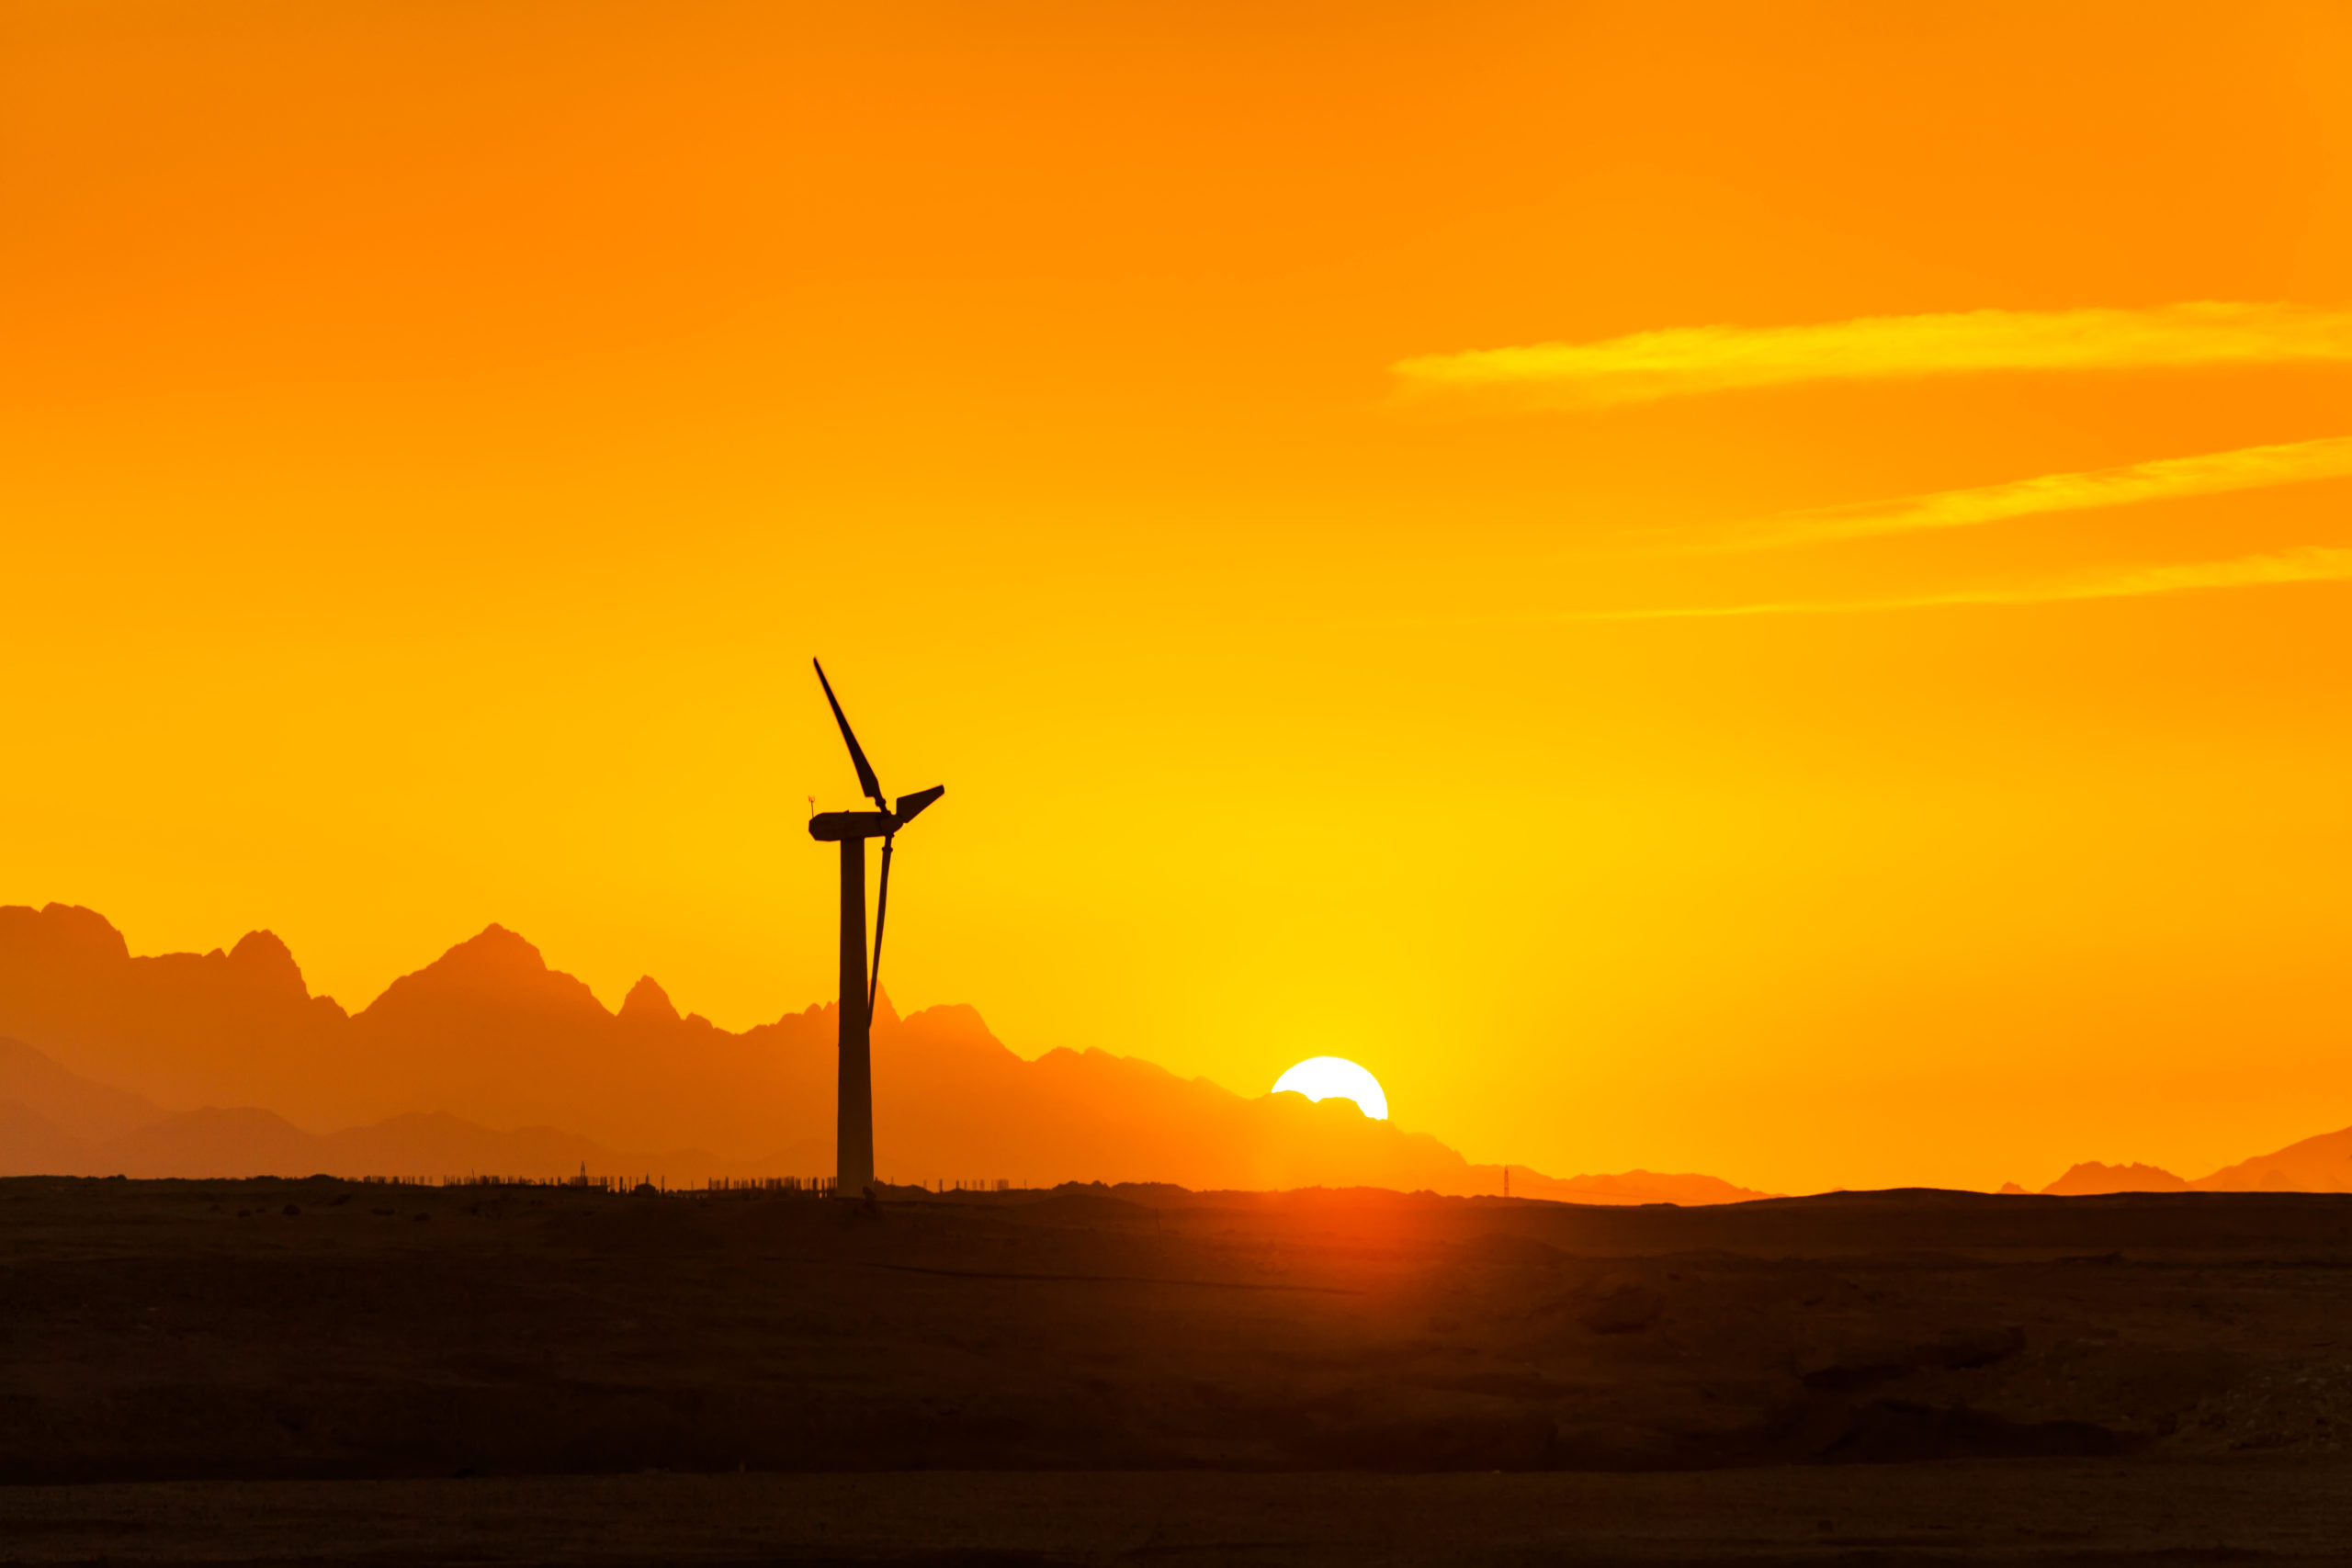 Big wind turbines in the desert against mountains.